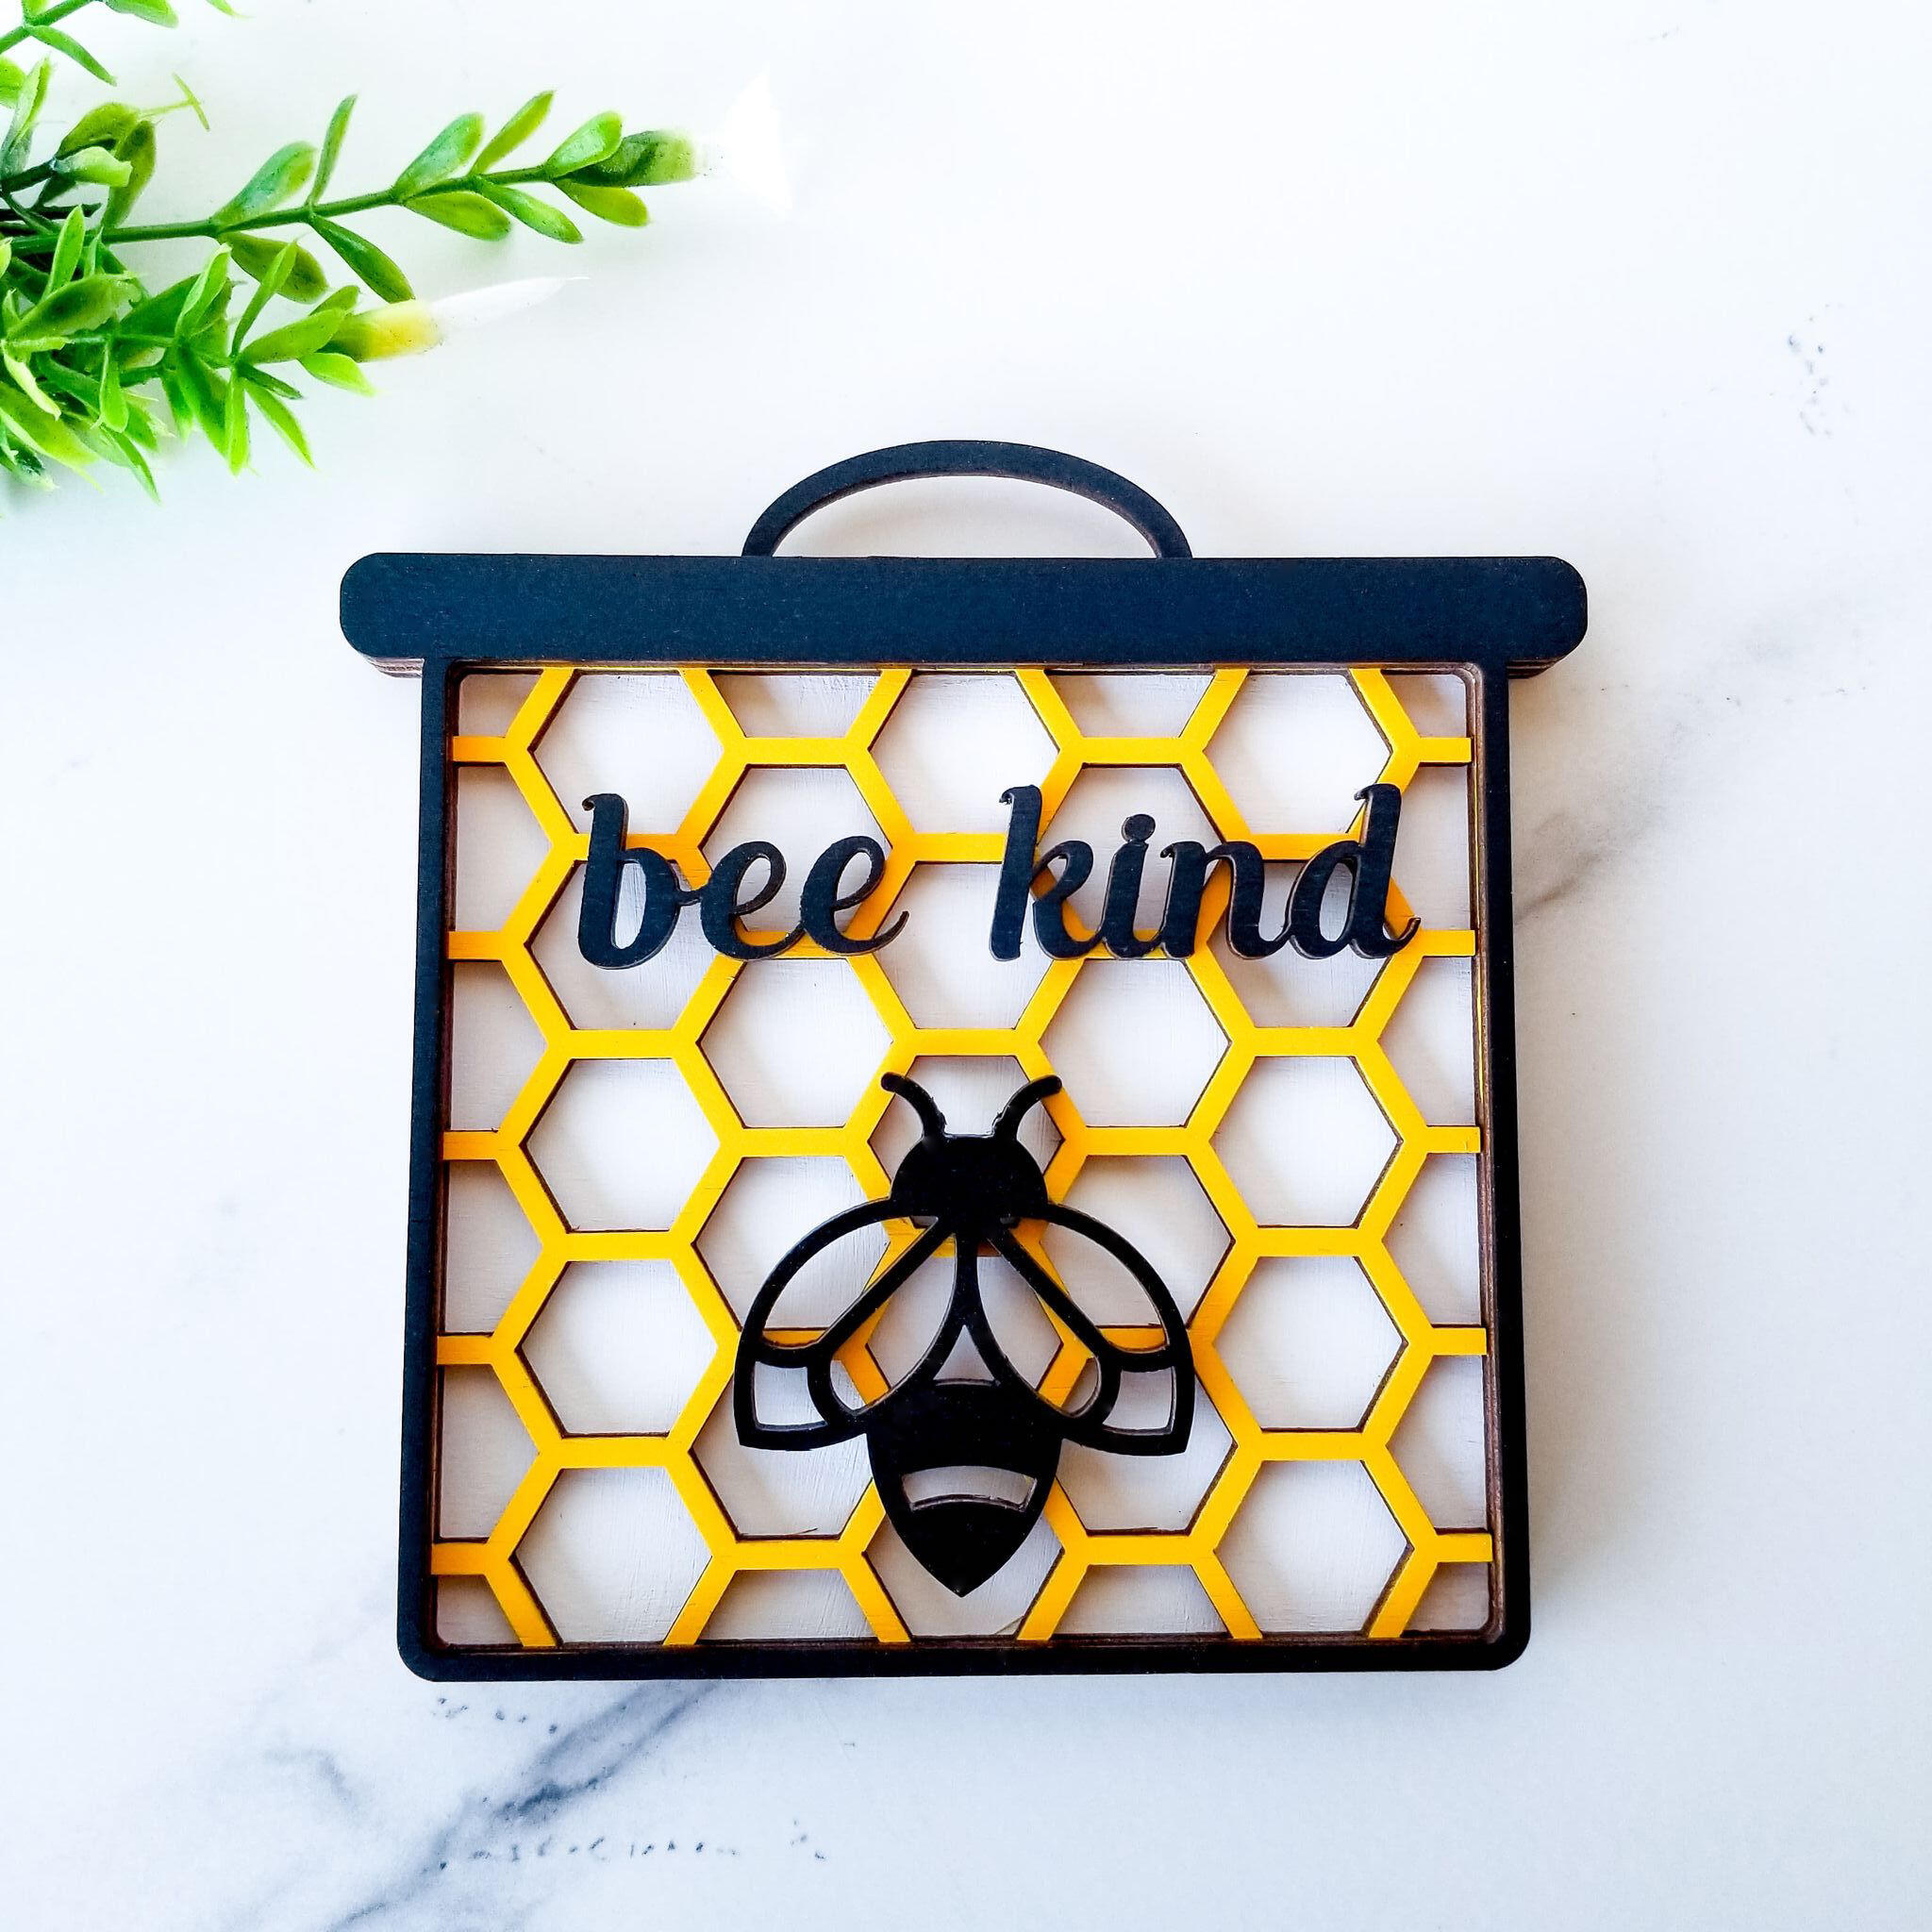 Spring Farmhouse Honey Bee Tiered Tray Decor With Bumble Bee - Temu